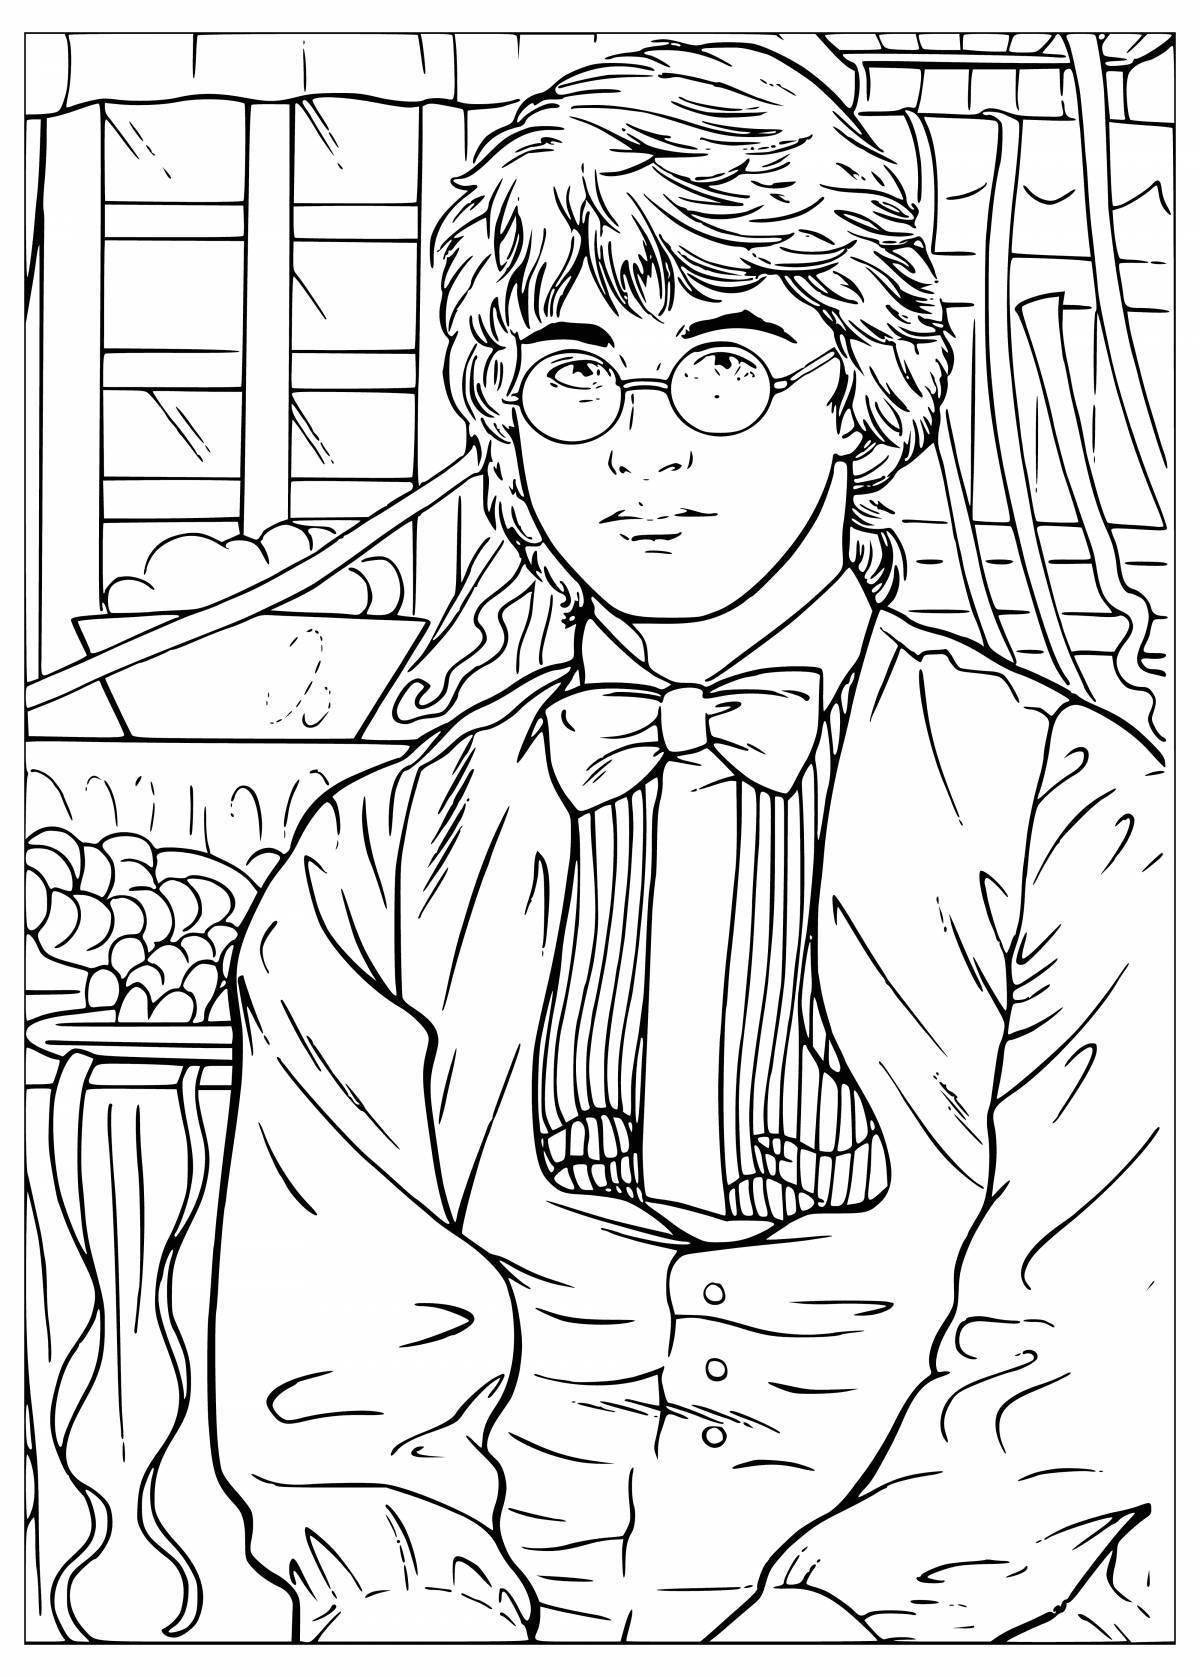 Harry potter glowing antistress coloring book